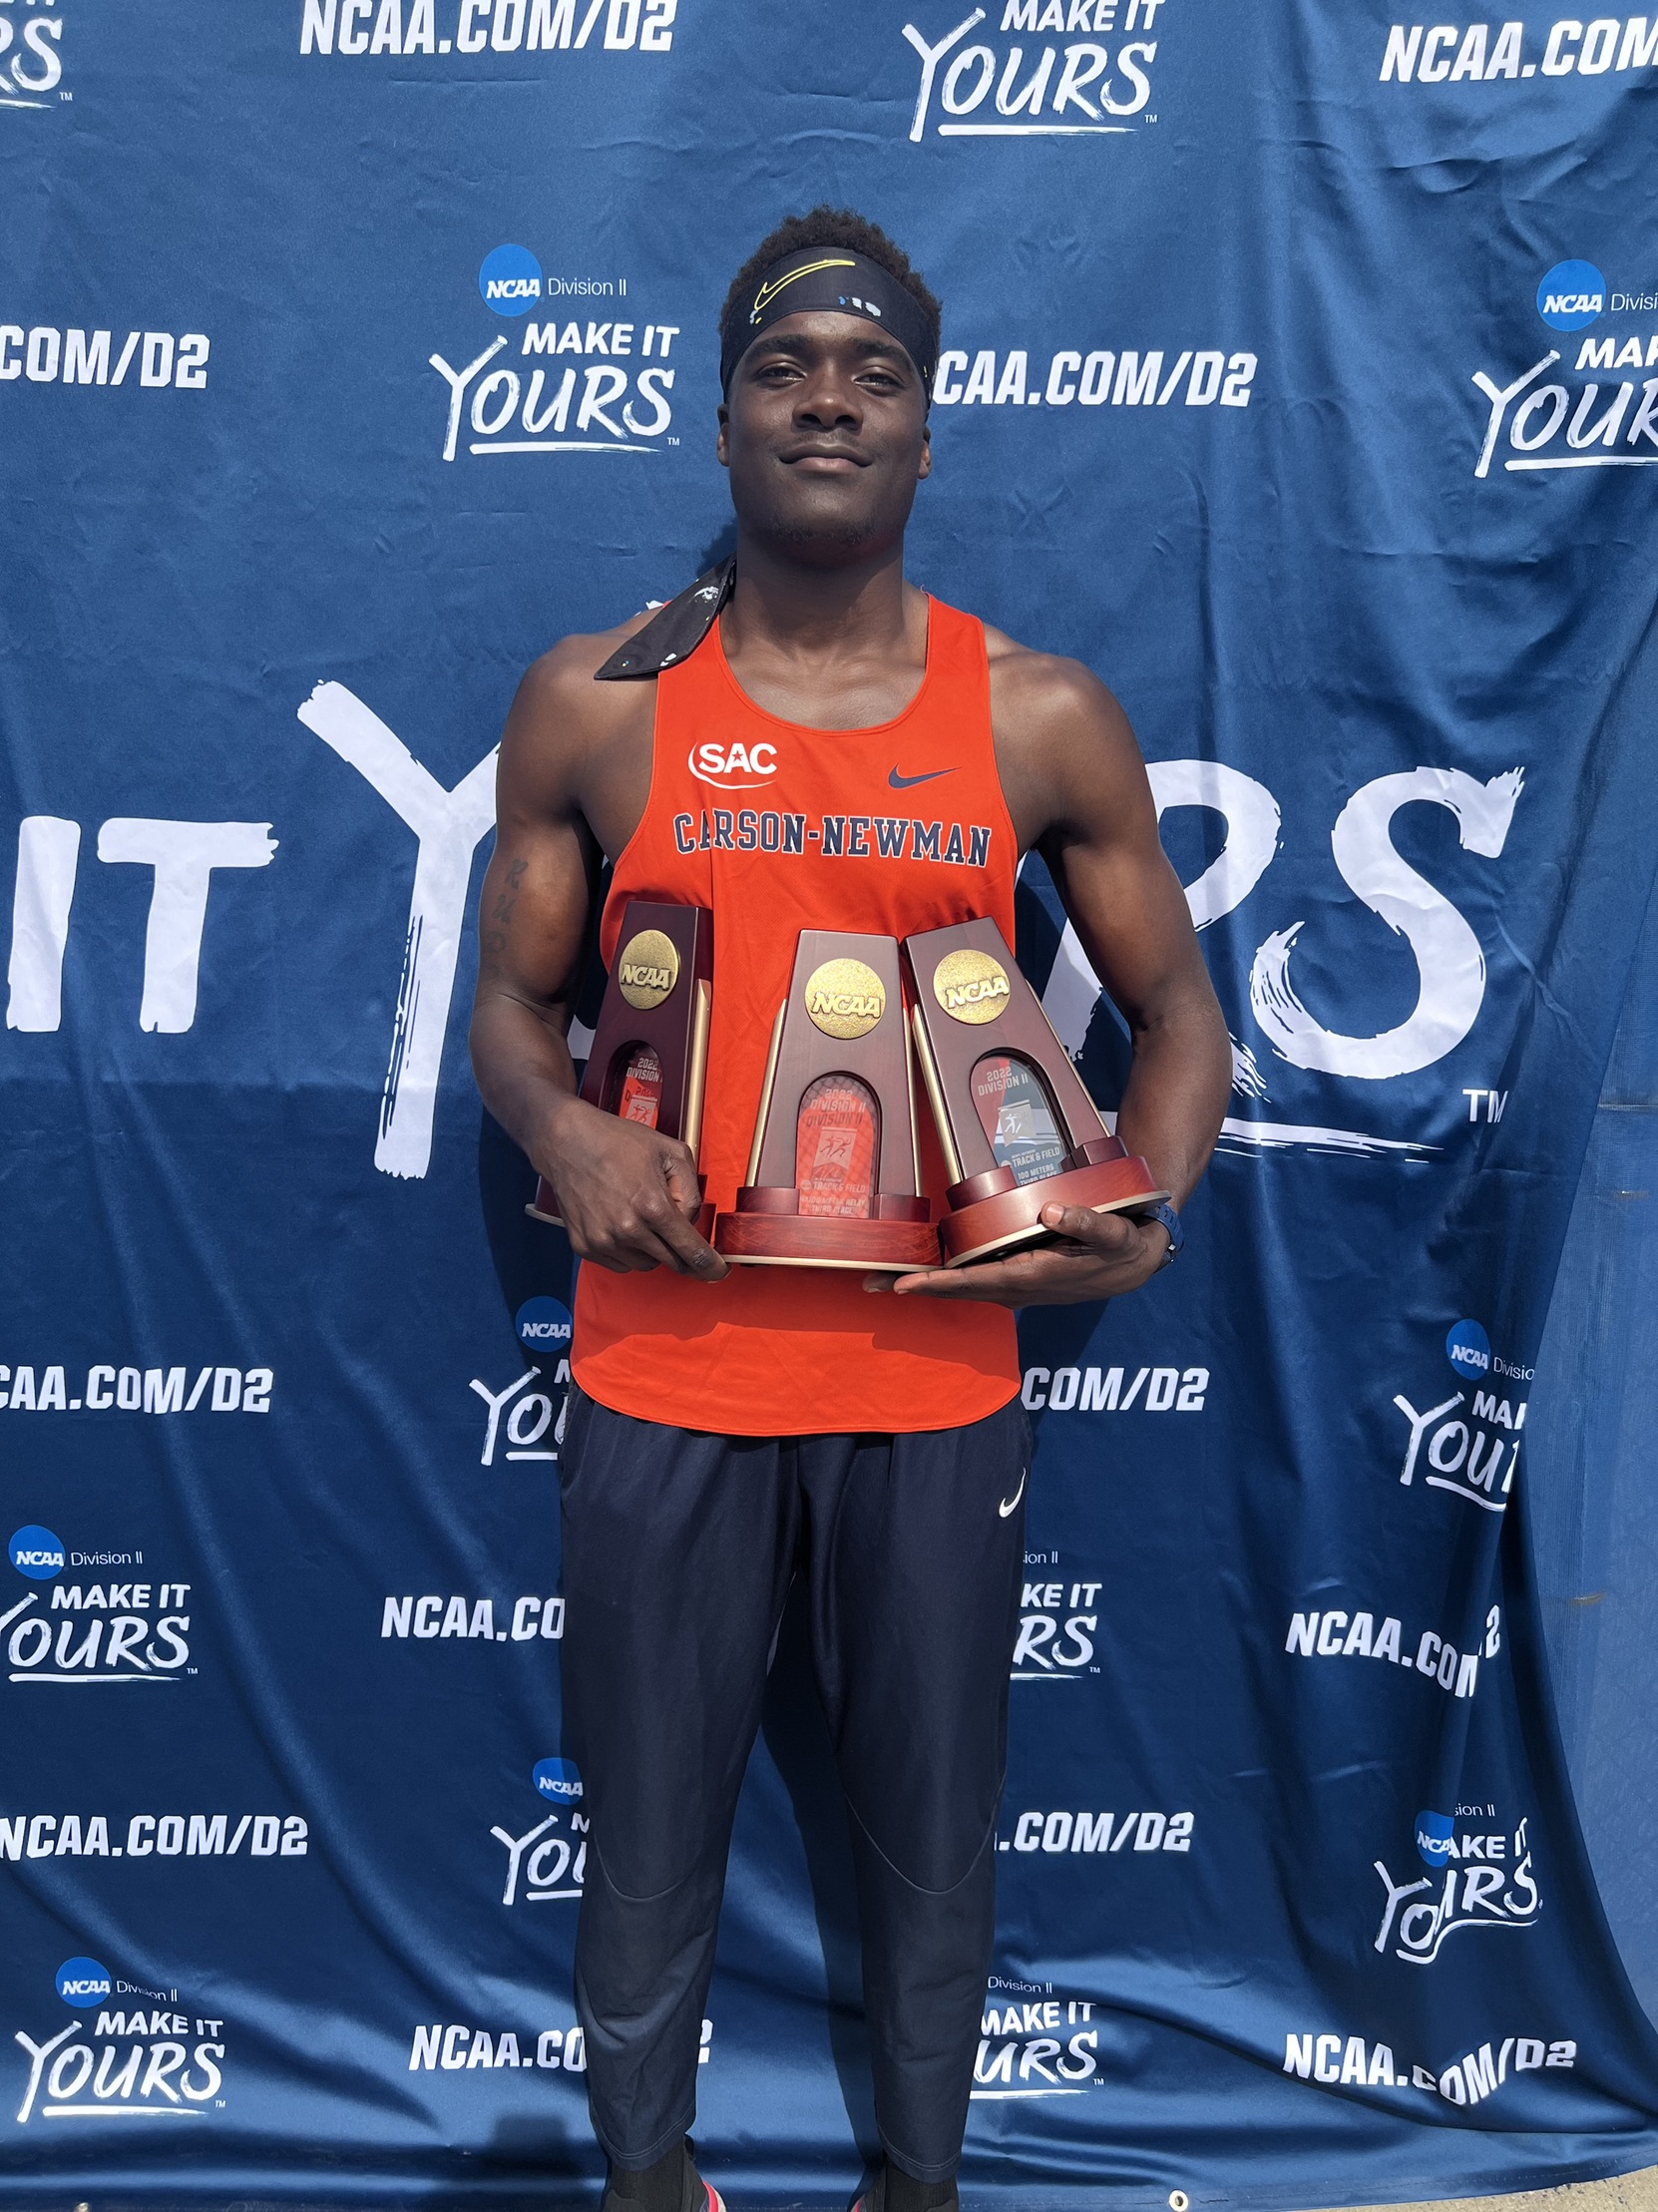 Charamba hauls in trio of bronze medals on final day of NCAA Outdoor Championships